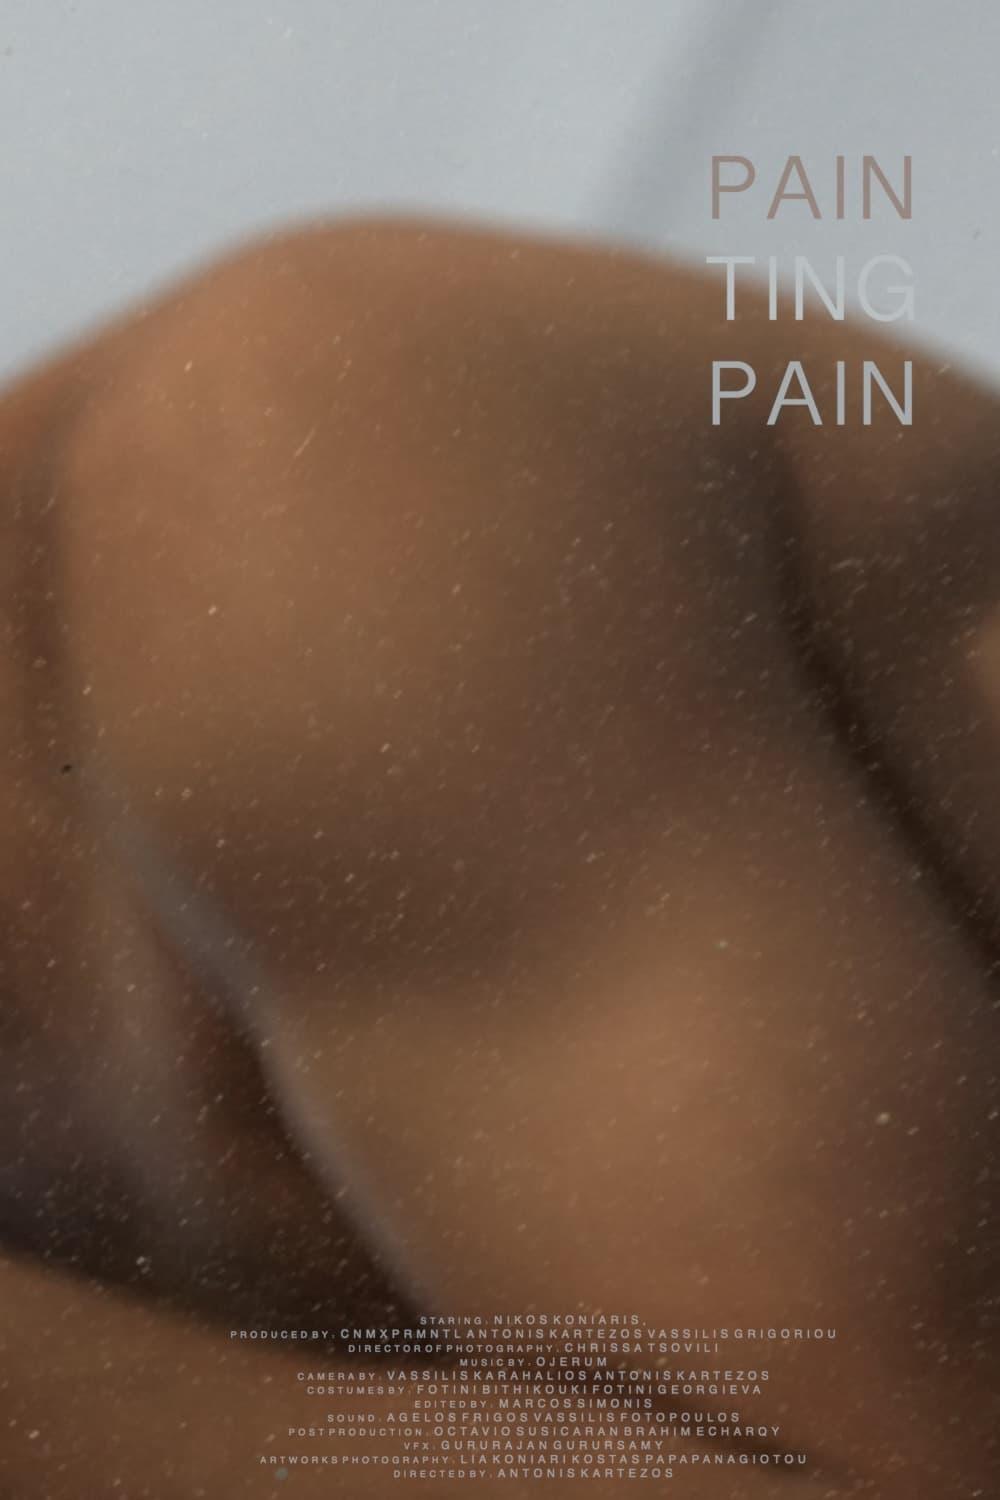 Painting Pain poster